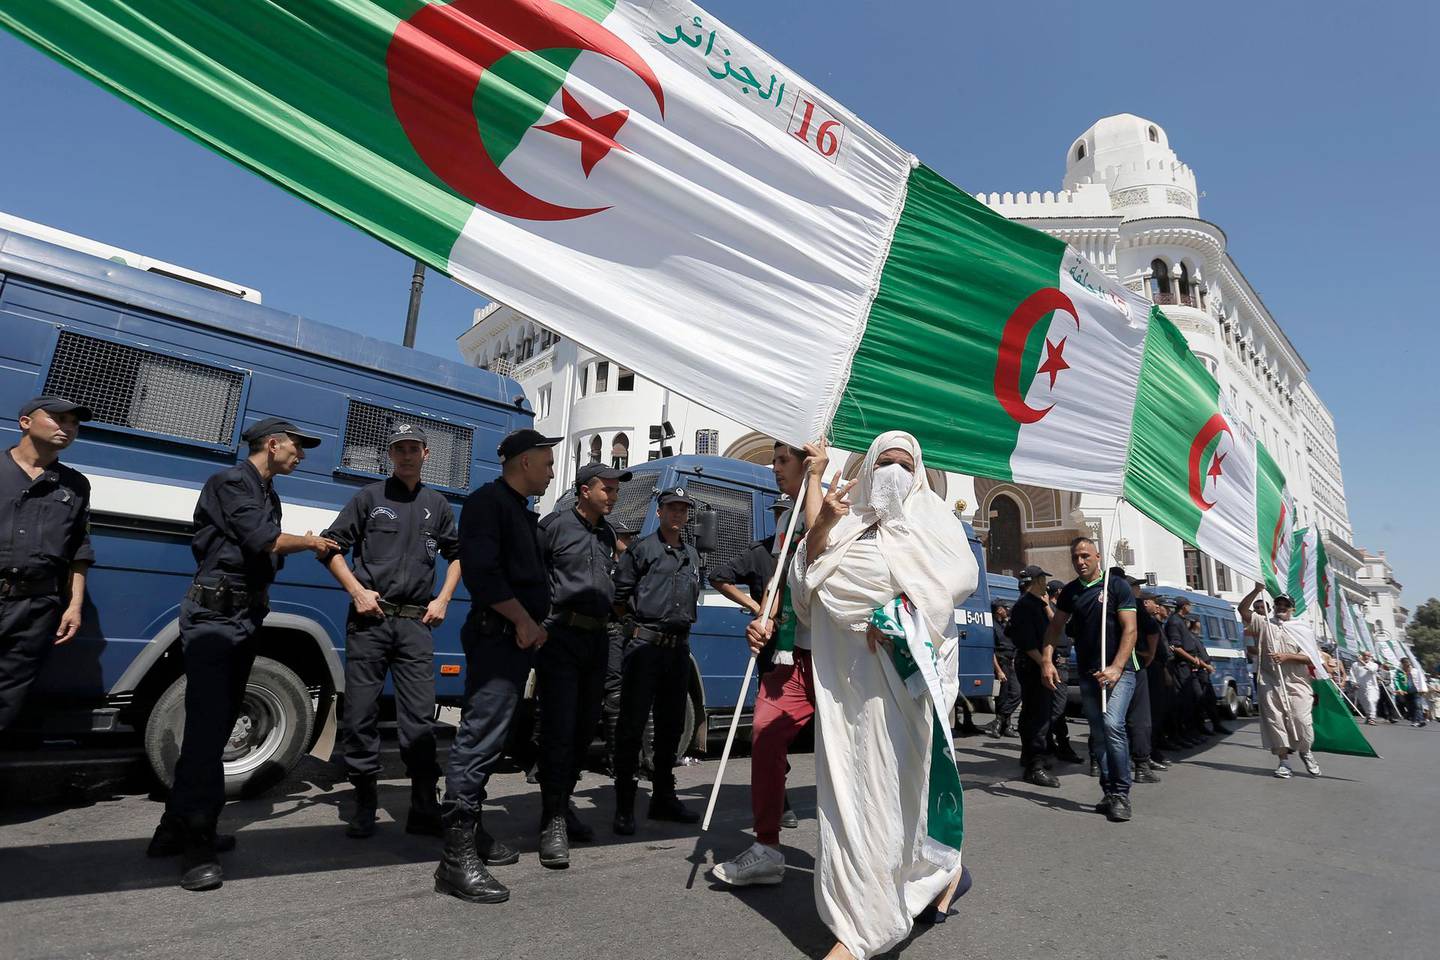 Algerian demonstrators carry a huge national flag in the capital Algiers to protest against the government, in Algeria, Friday, Aug. 16, 2019 (AP Photo/Toufik Doudou)